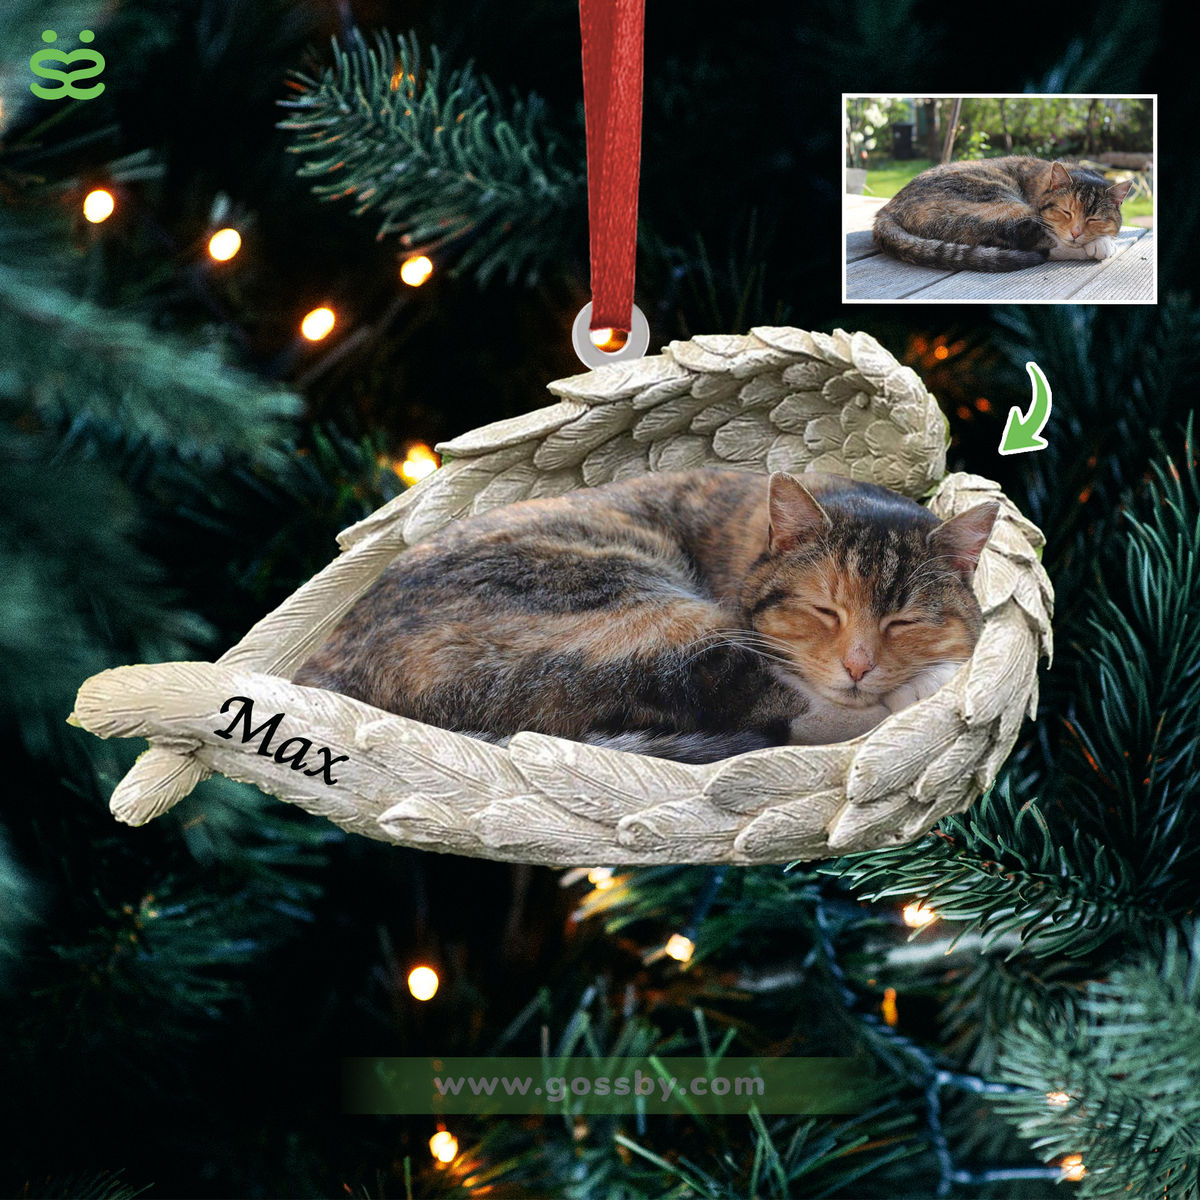 Dog Acrylic Ornament - Dog Lover Gifts - Sleeping Pet Within Angel Wings - Custom Ornament from Photo - Christmas Gifts_3